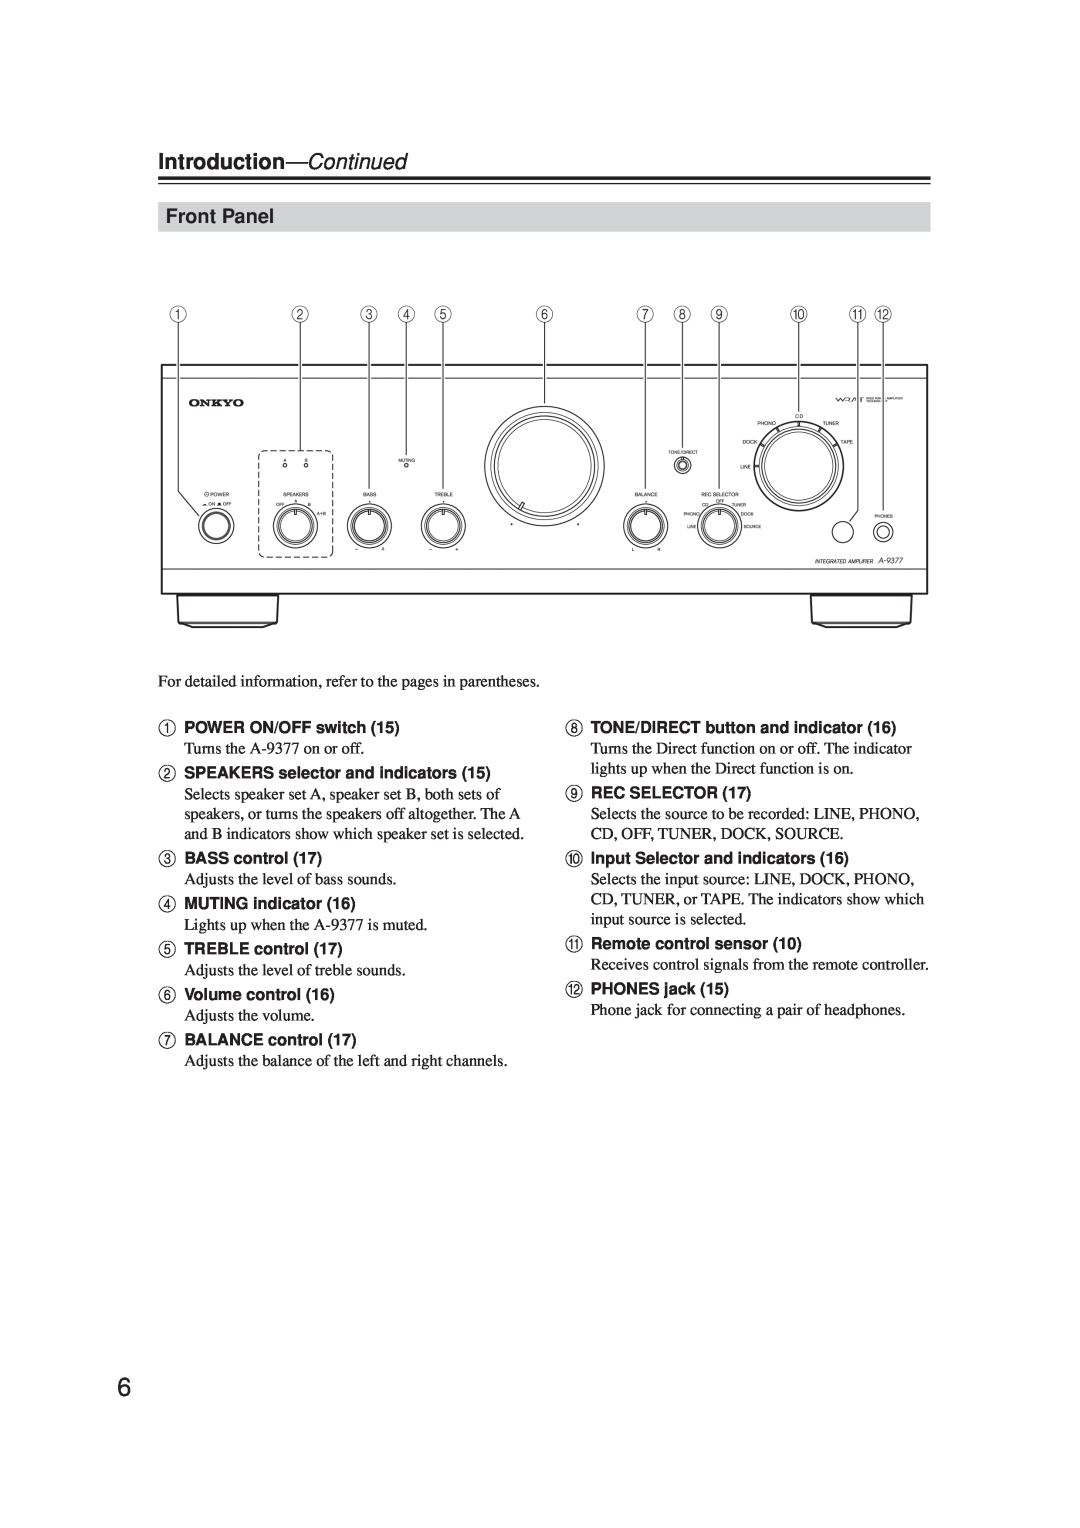 Onkyo A-9377 instruction manual Introduction-Continued, Front Panel, J K L 